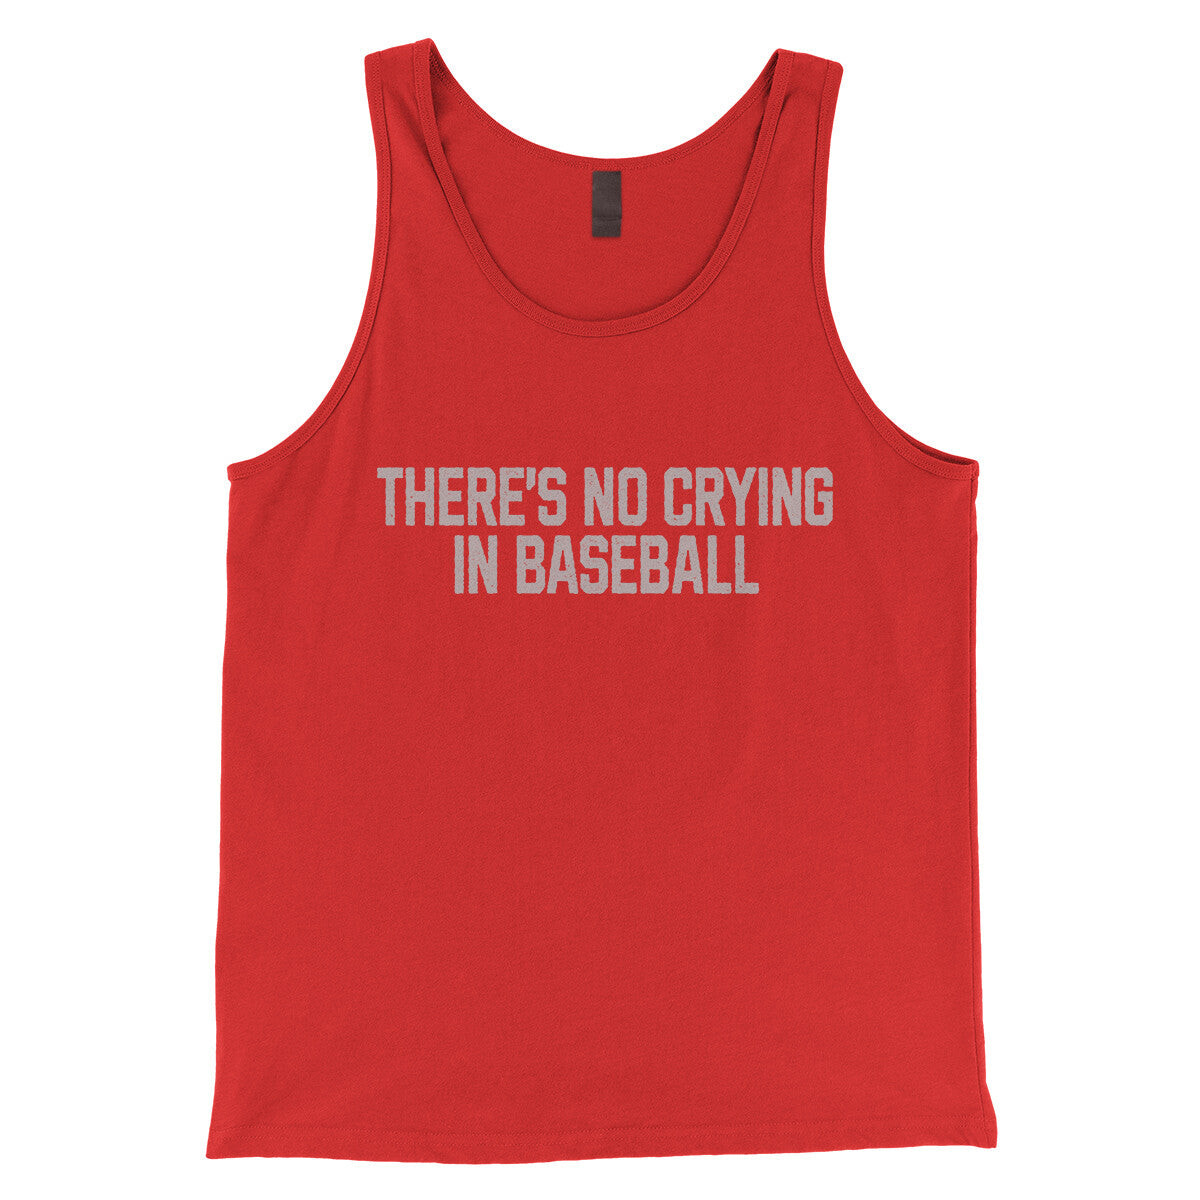 There's No Crying in Baseball in Red Color